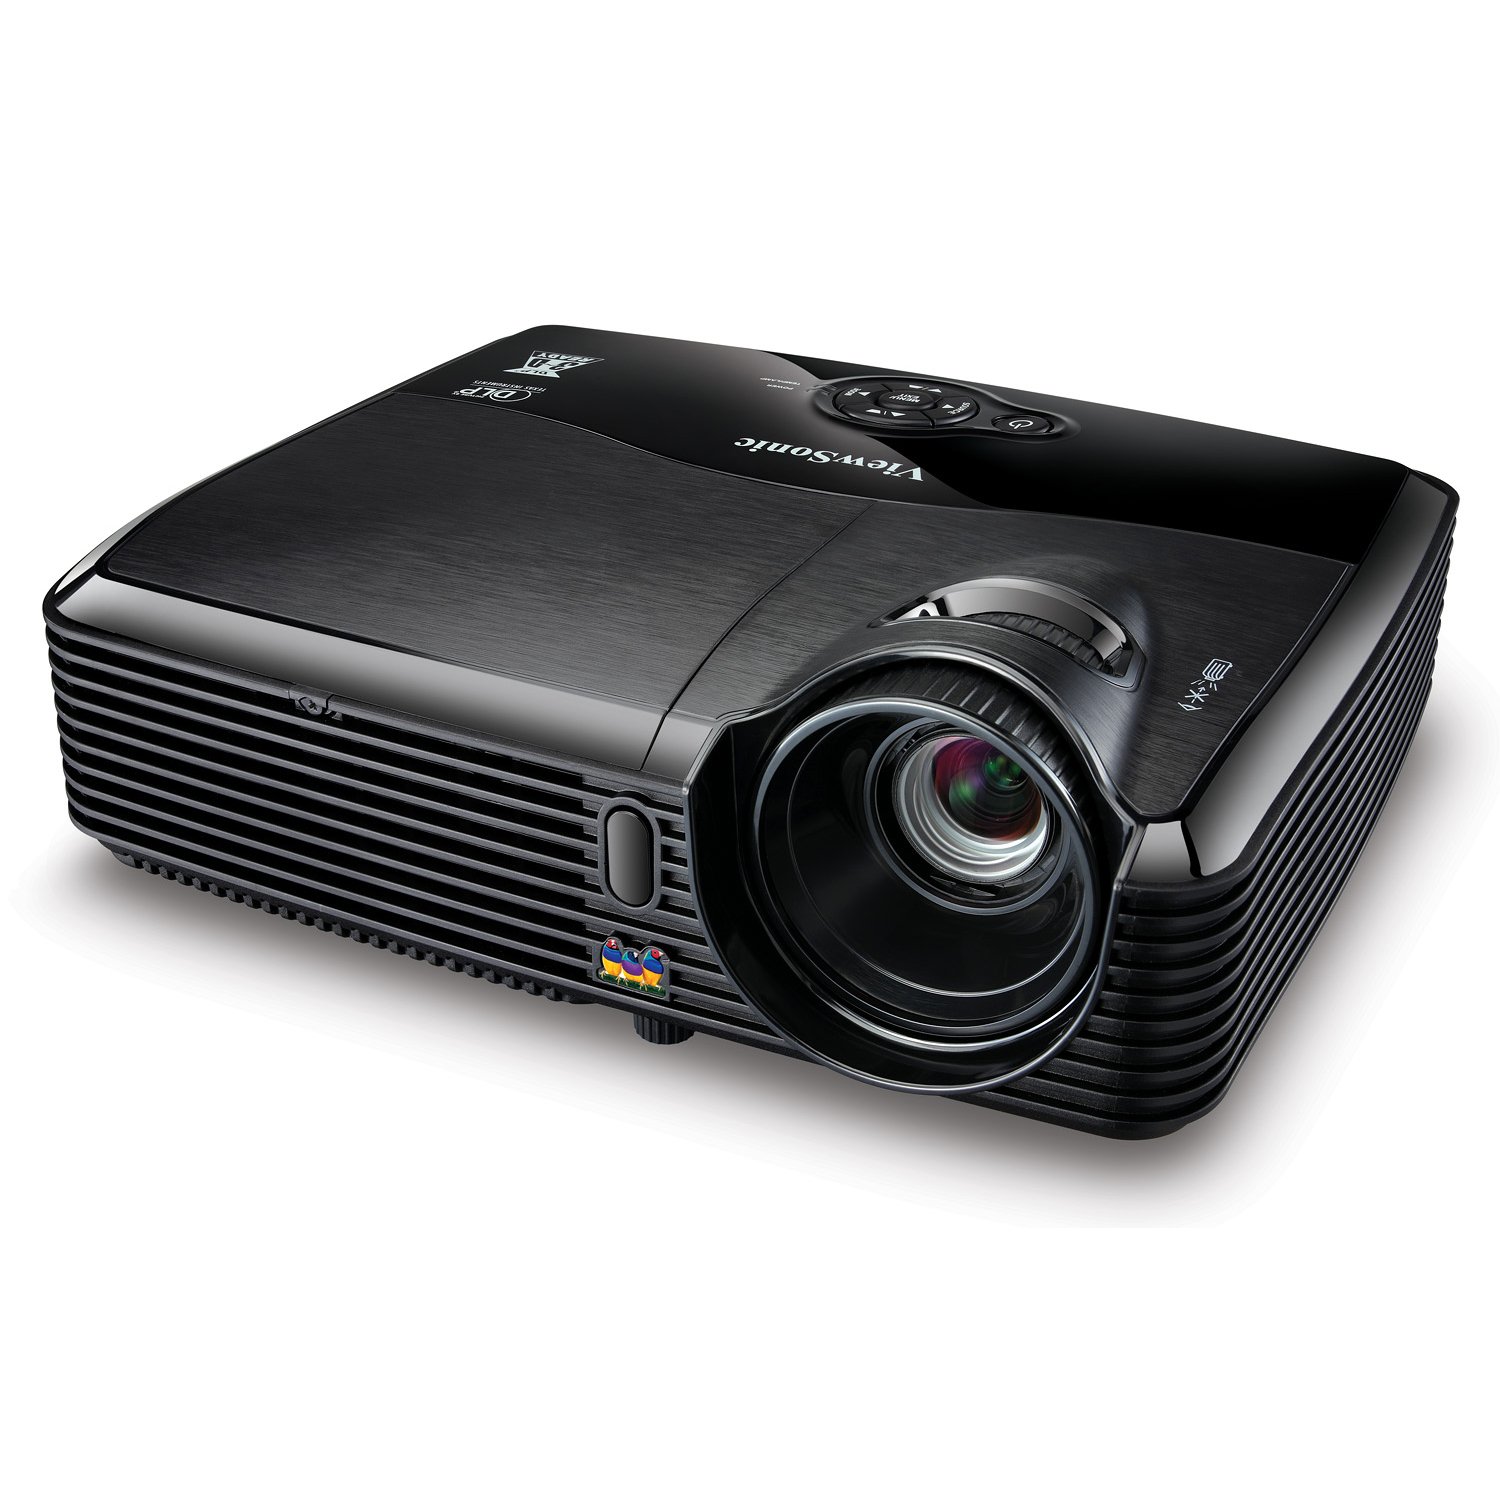 ViewSonic PJD5233 300-Inch 720i Front Projector (Black)  $429.99